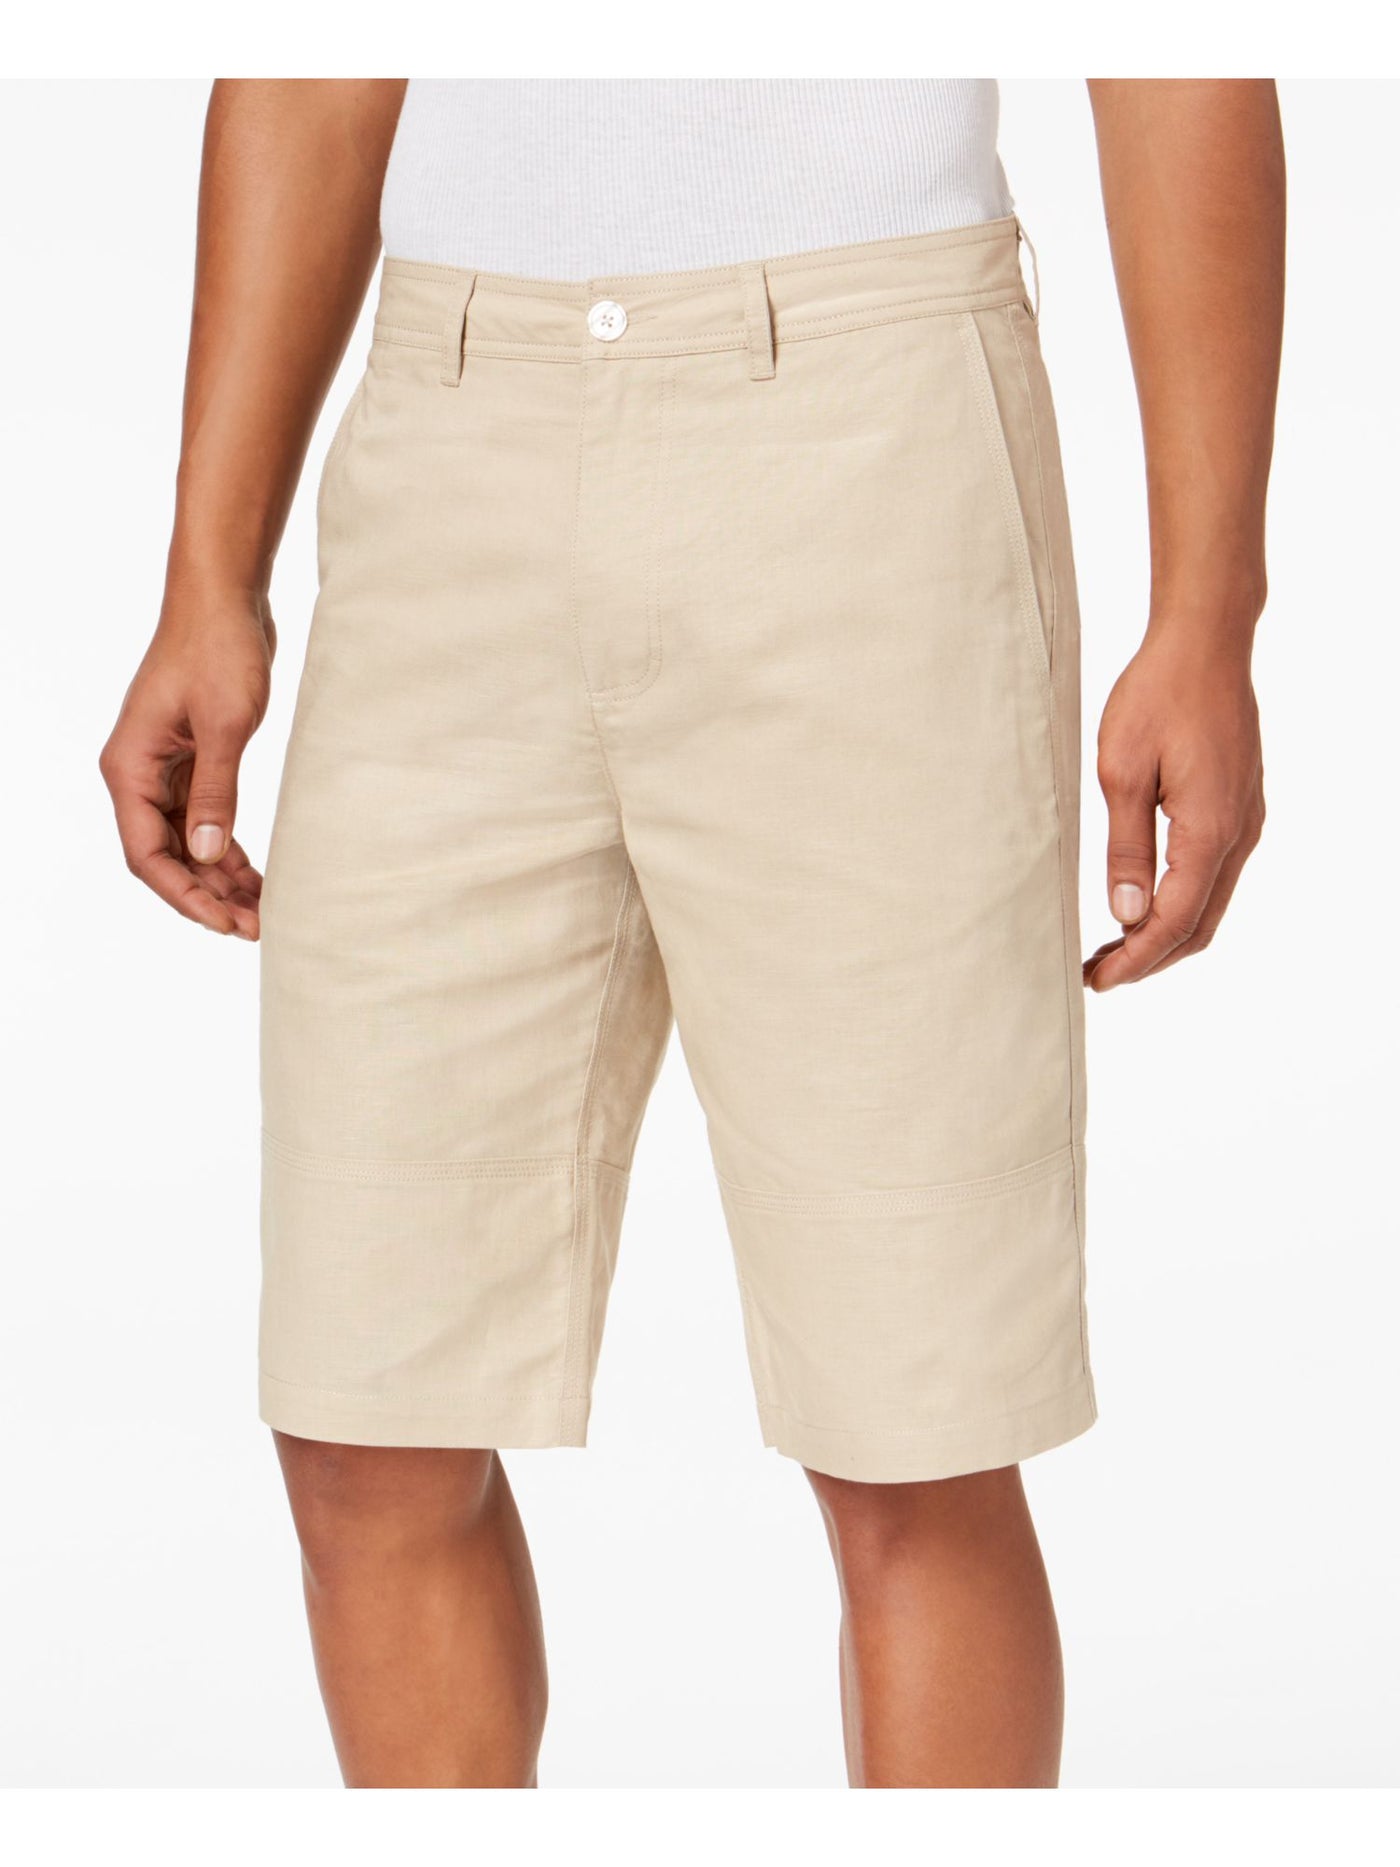 SEANJOHN Mens Beige Relaxed Fit Shorts 30 Waist